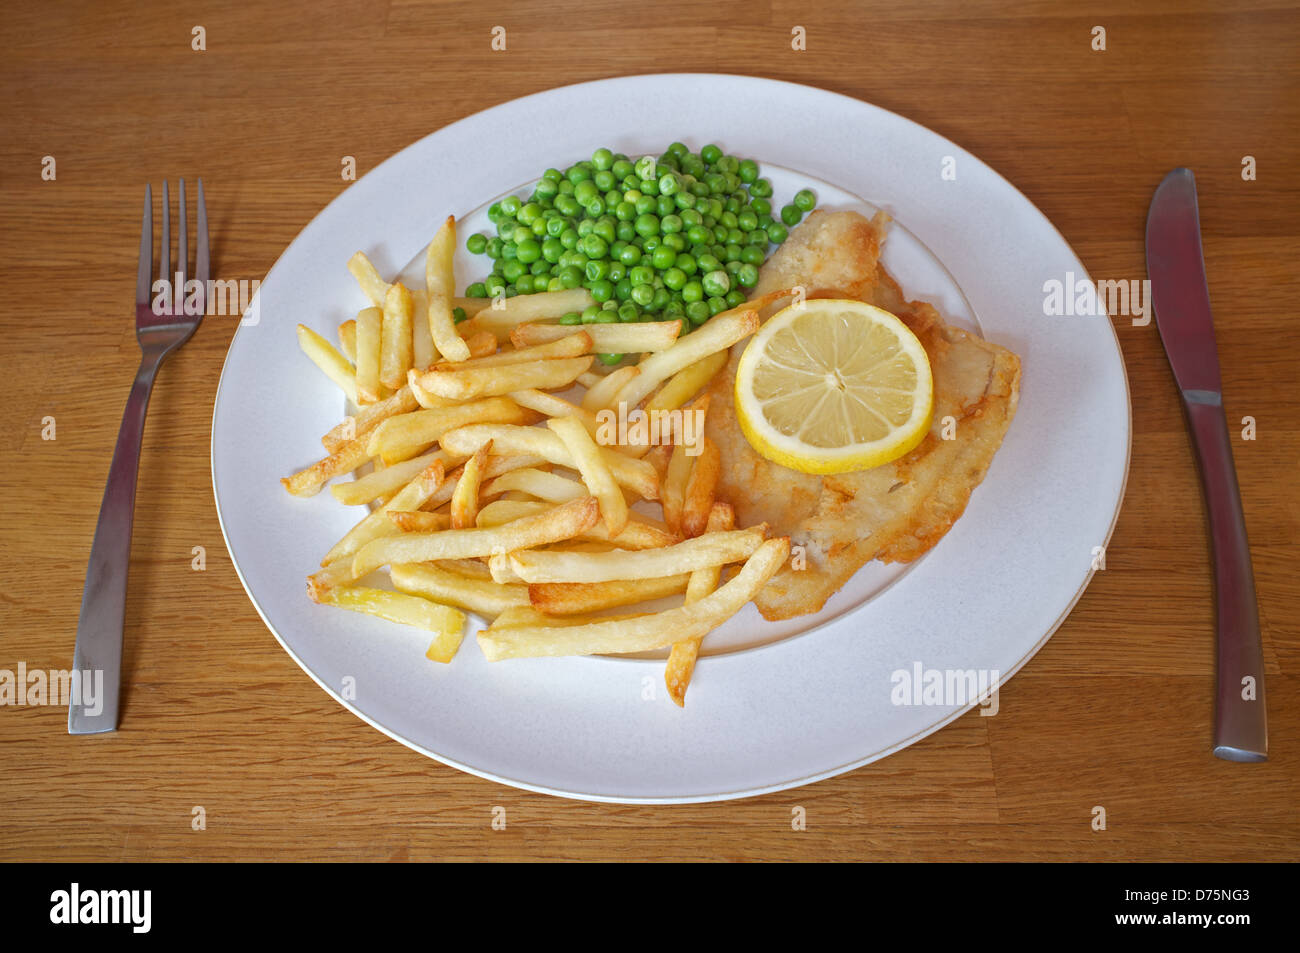 Fish, chips and peas Stock Photo